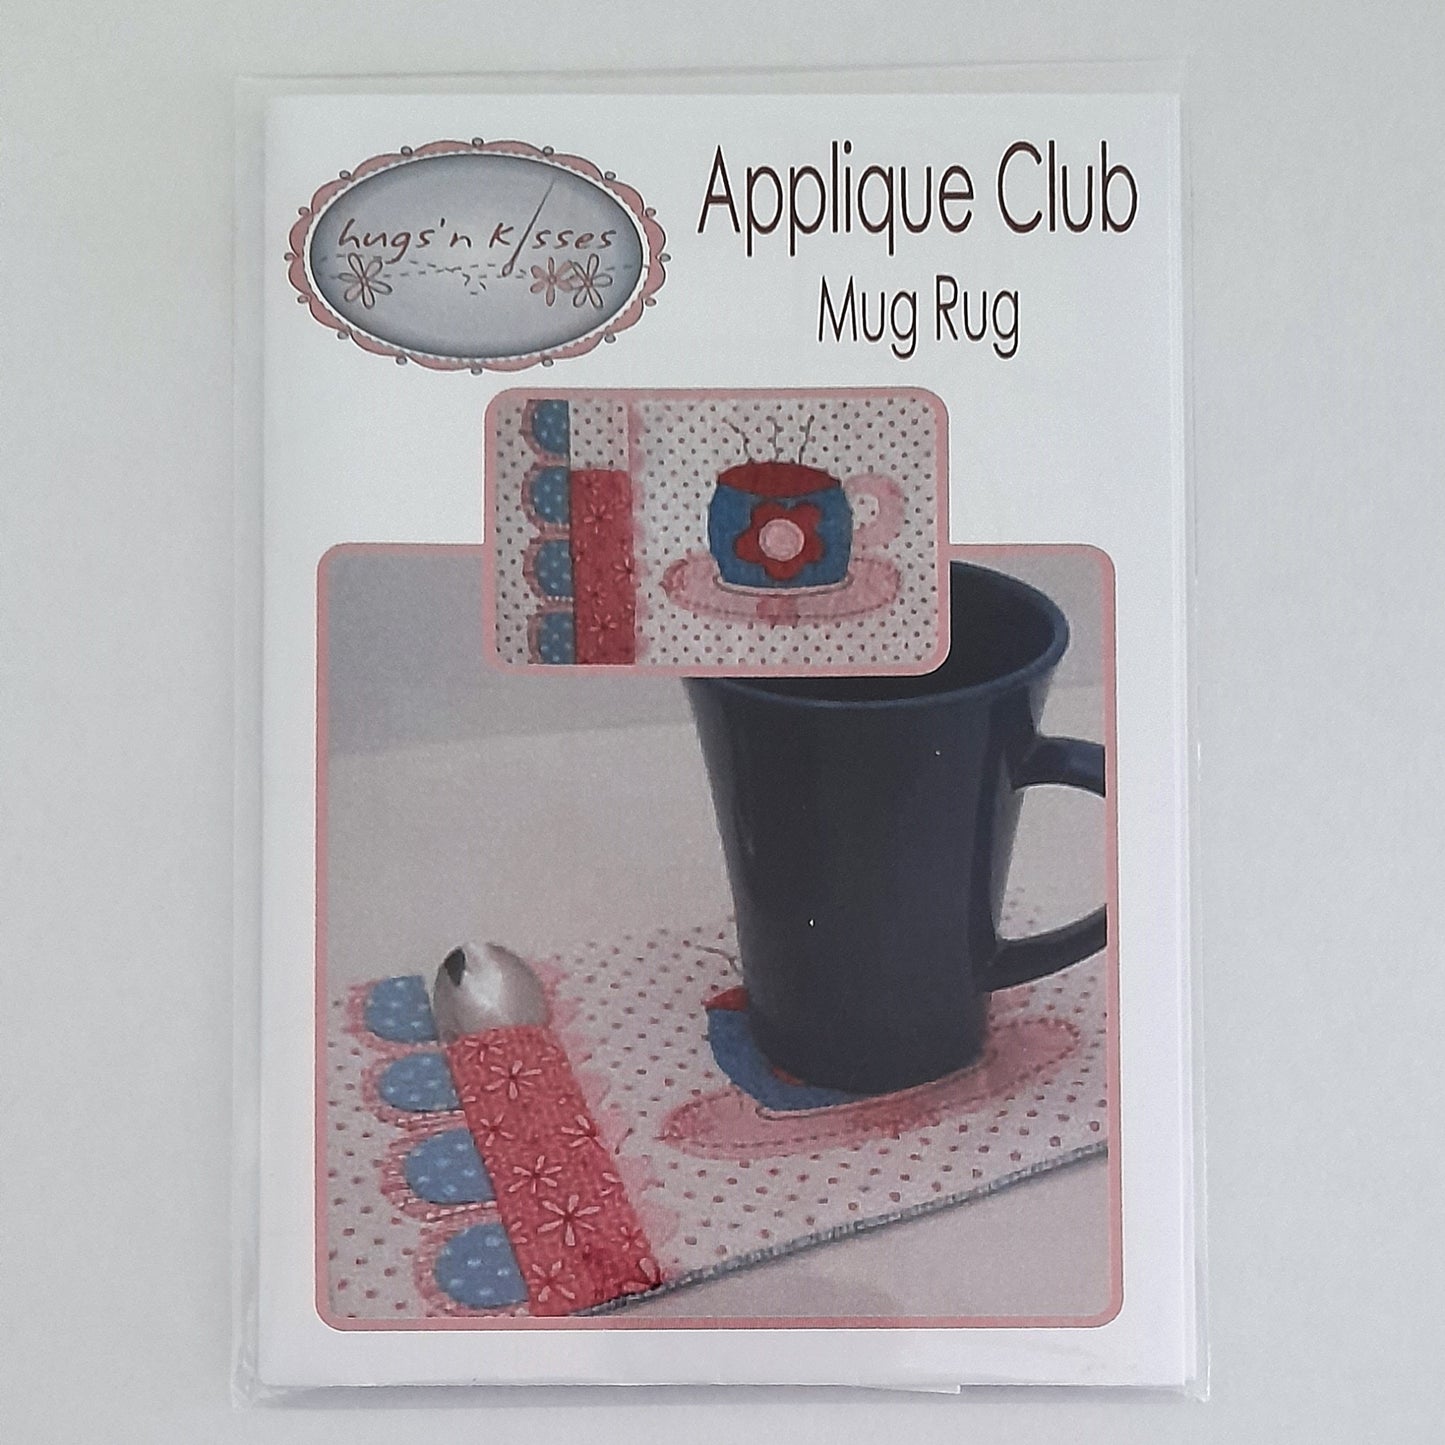 Applique Mug Rug - applique and embroidery project Hugs n Kisses pattern